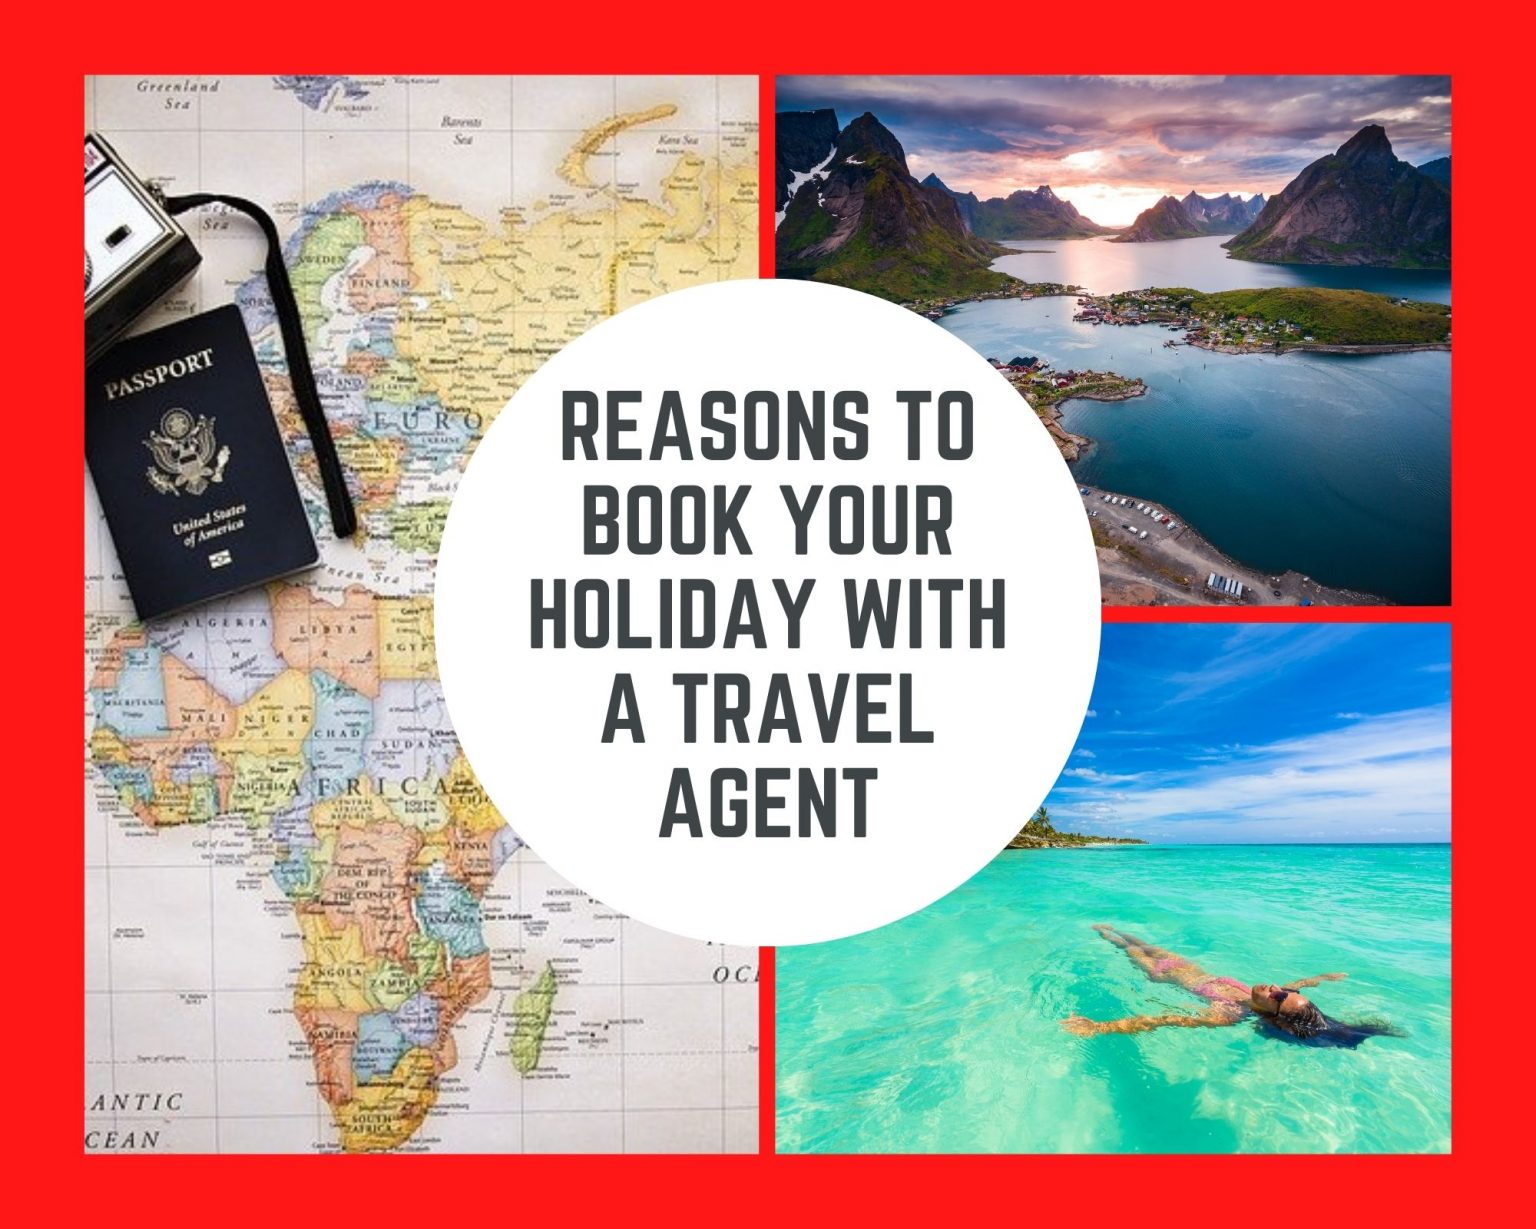 book online or travel agent